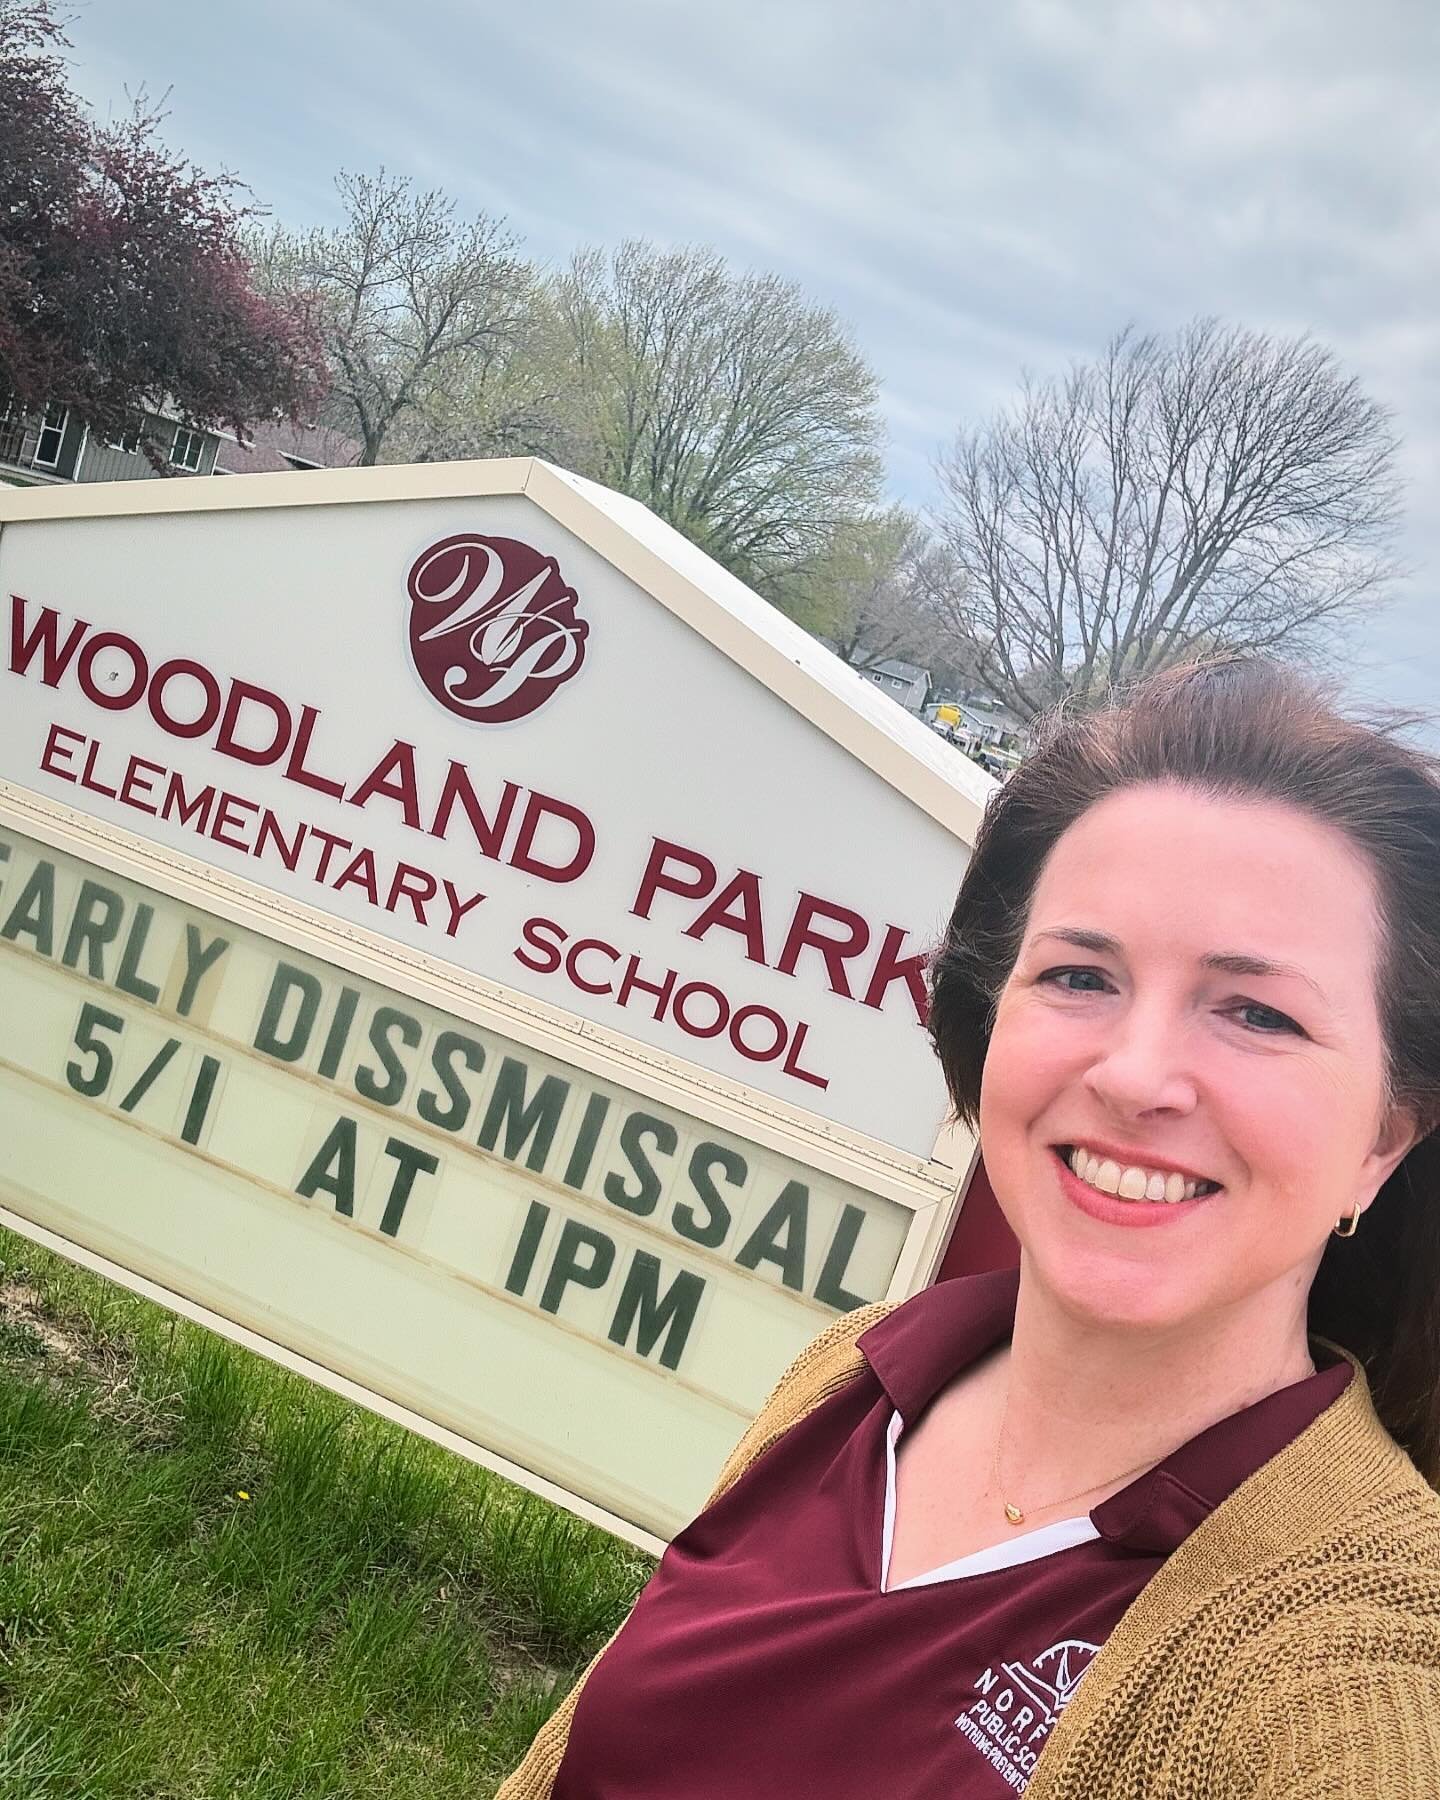 I really enjoyed my visit to Woodland Park Elementary yesterday!  Thank you to Principal Bruce Strong for walking me around. We talked about WPES&rsquo;s strategic goal for improving math scores and saw how different classrooms are using visible moti